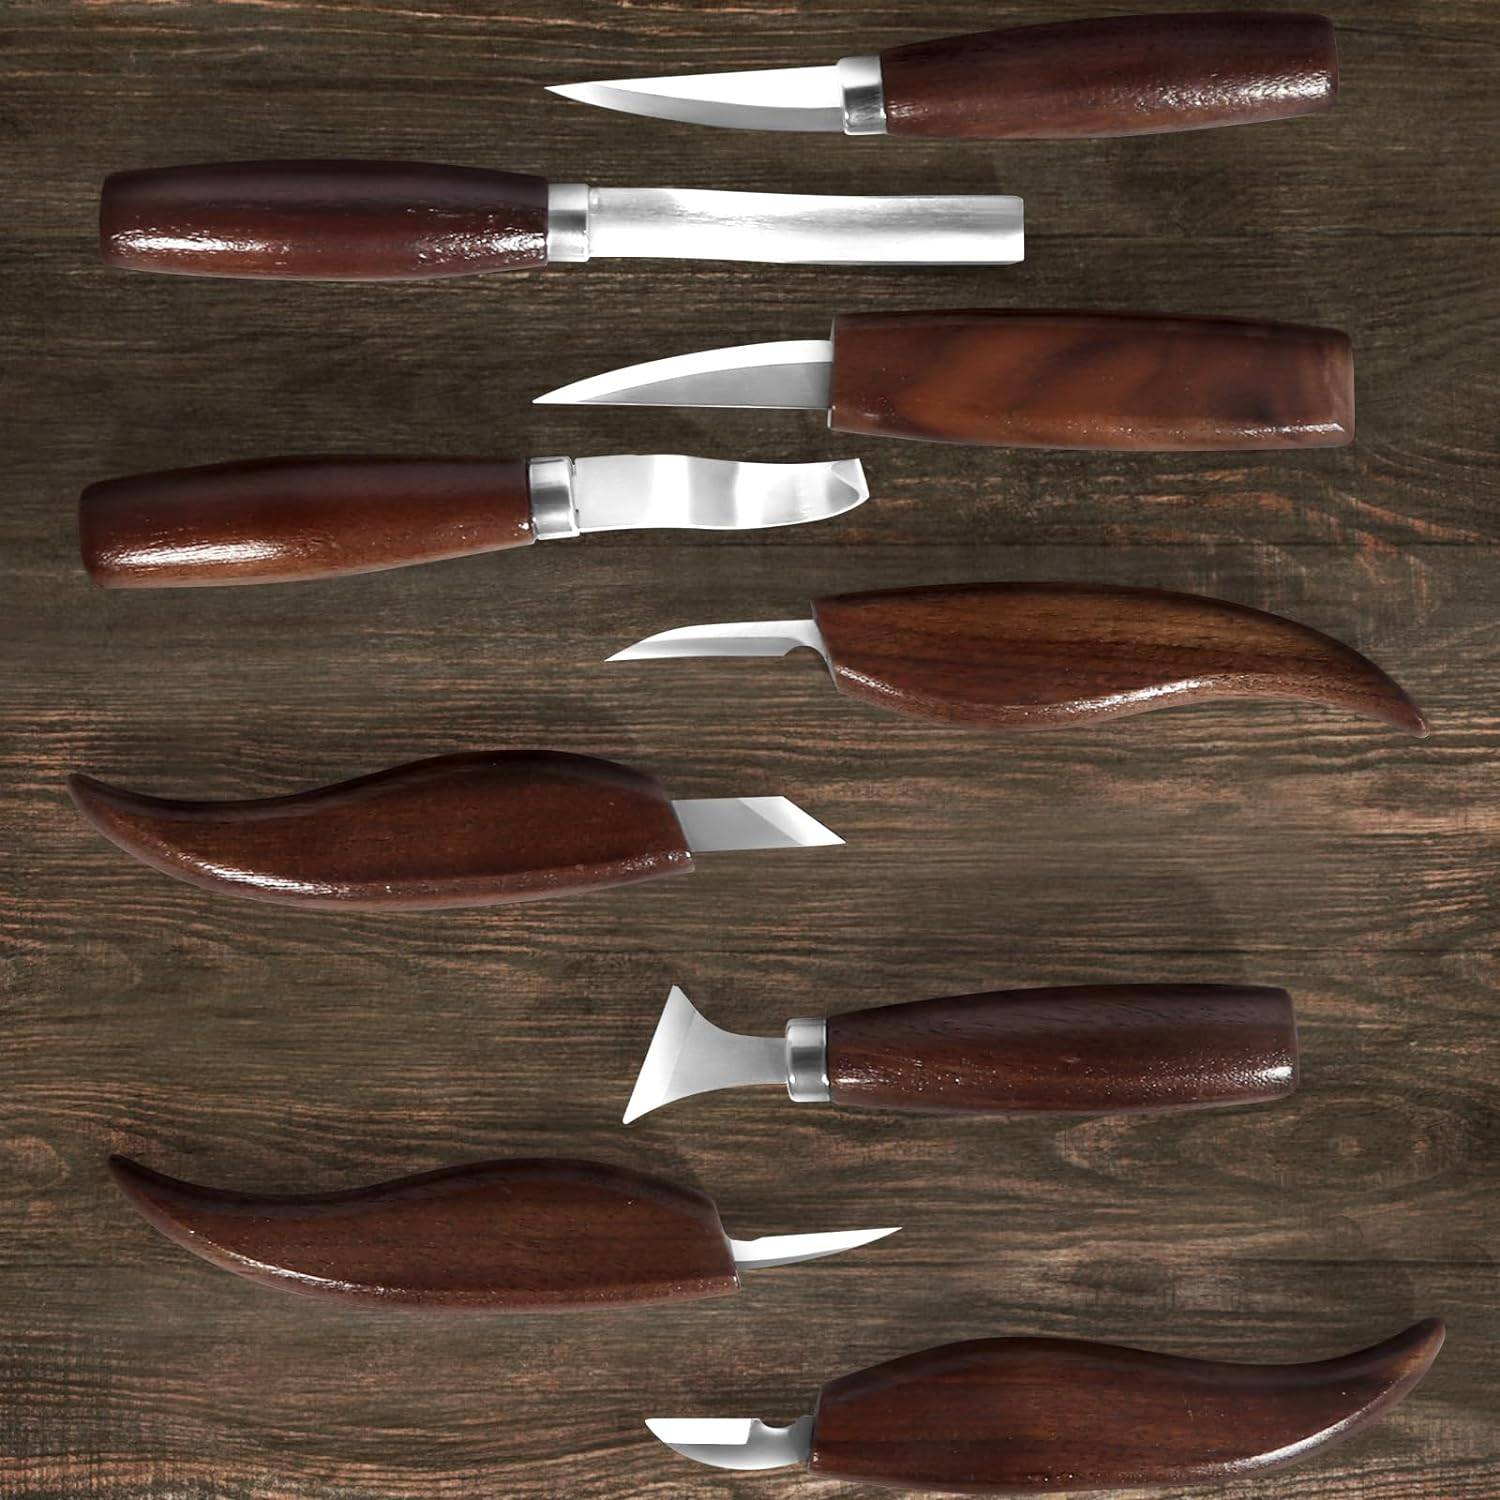 Whittling knives laid out on a wooden background.